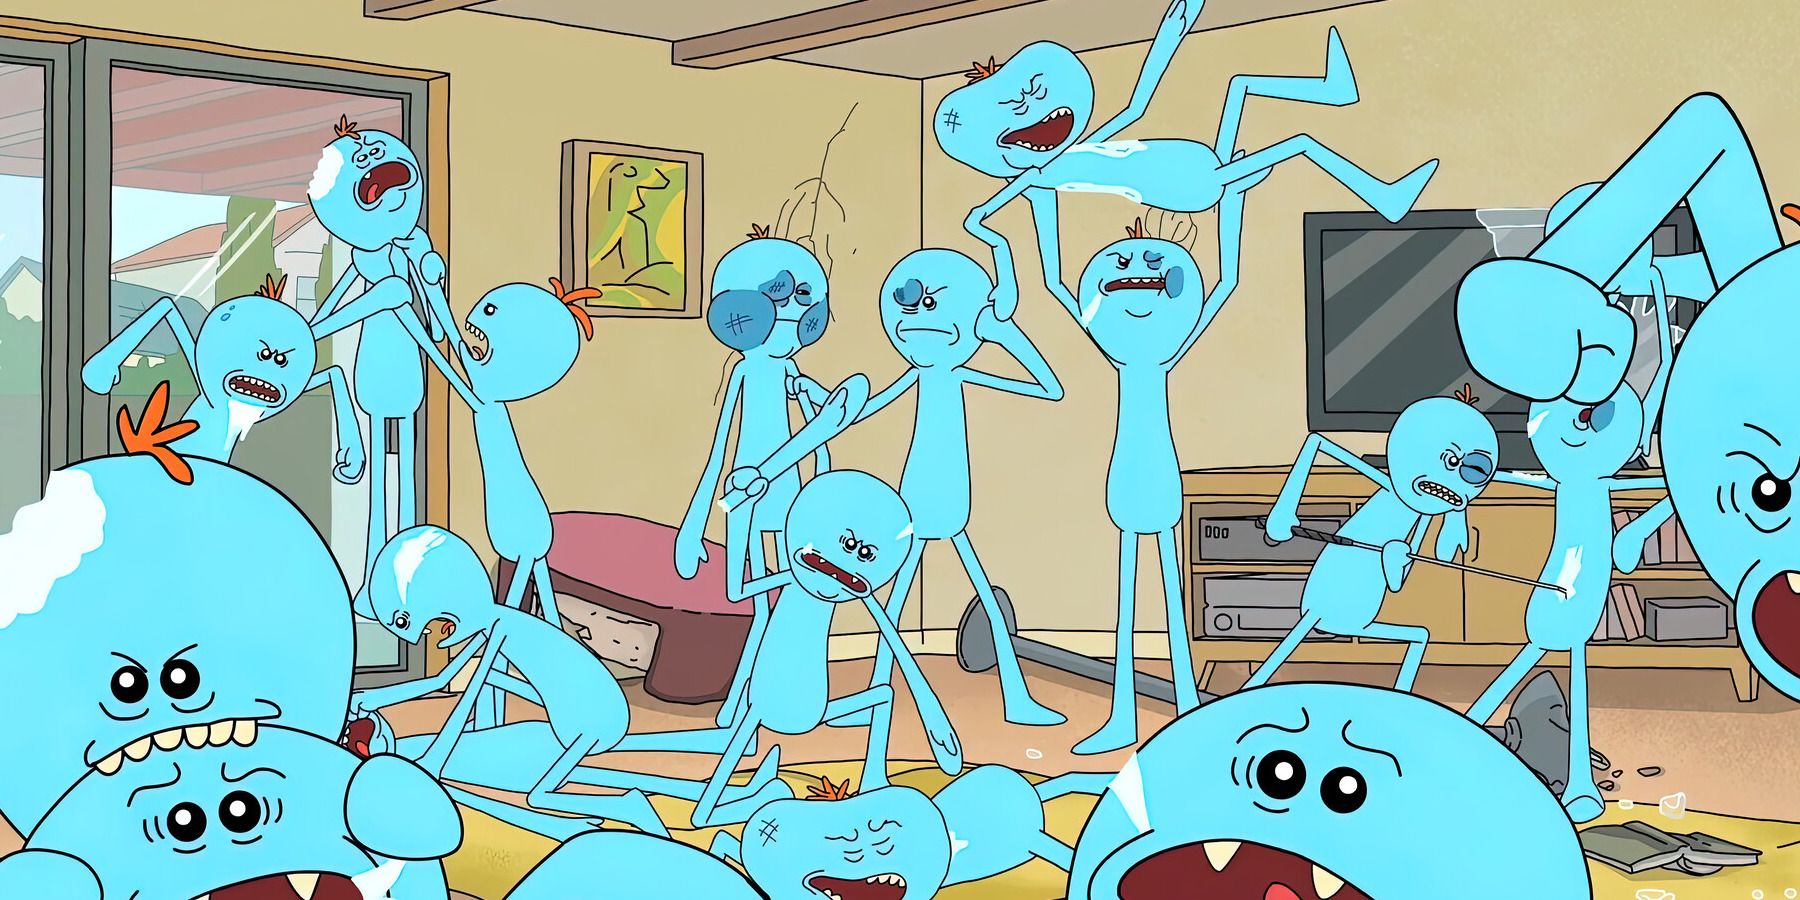 Rick-and-Morty-Mr-Meeseeks-Rainbow-Six-Siege-Announcement